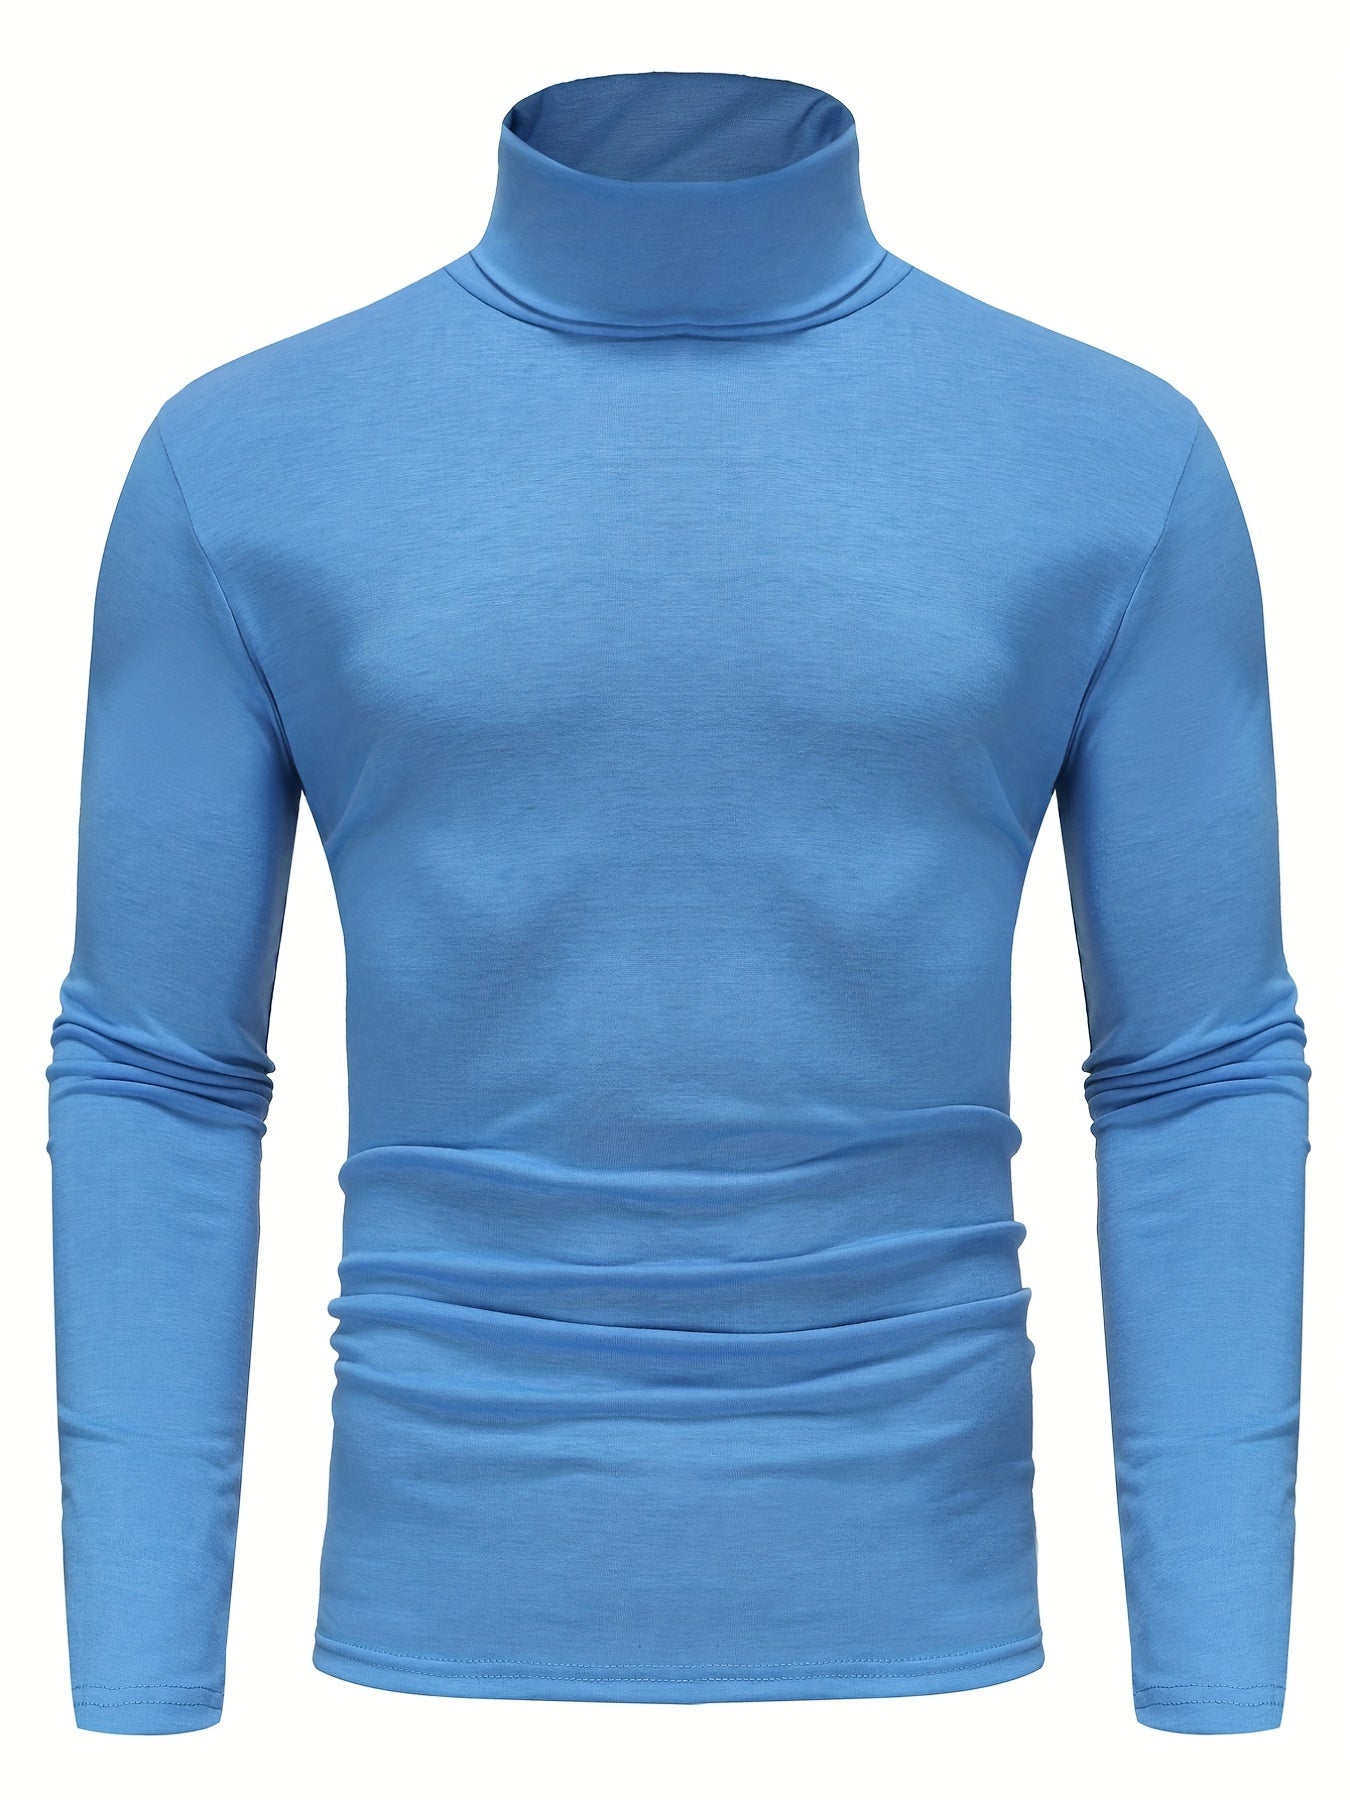 One Size Smaller,  Close-Fitting And Thin, Men's Casual Long Sleeve Turtleneck Base Layer Shirt Best Sellers